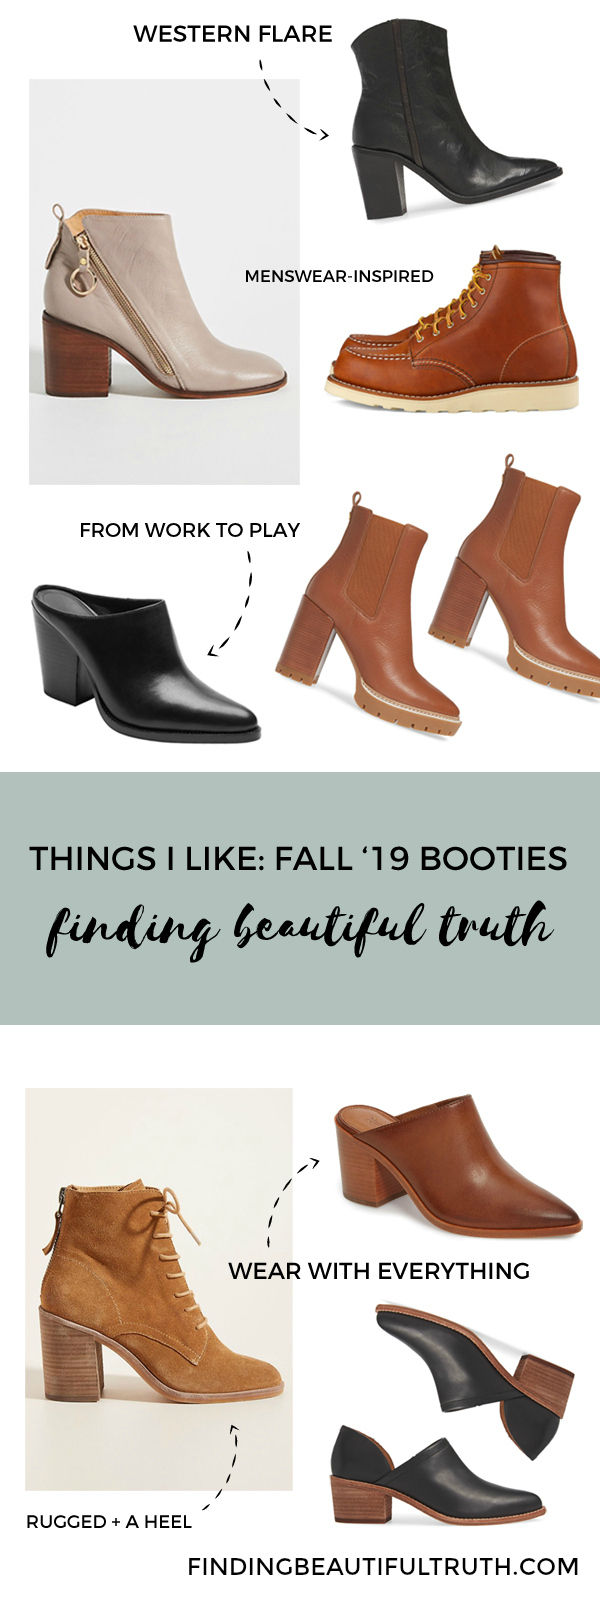 a roundup of Fall '19 booties | boots + shoes I like via Finding Beautiful Truth